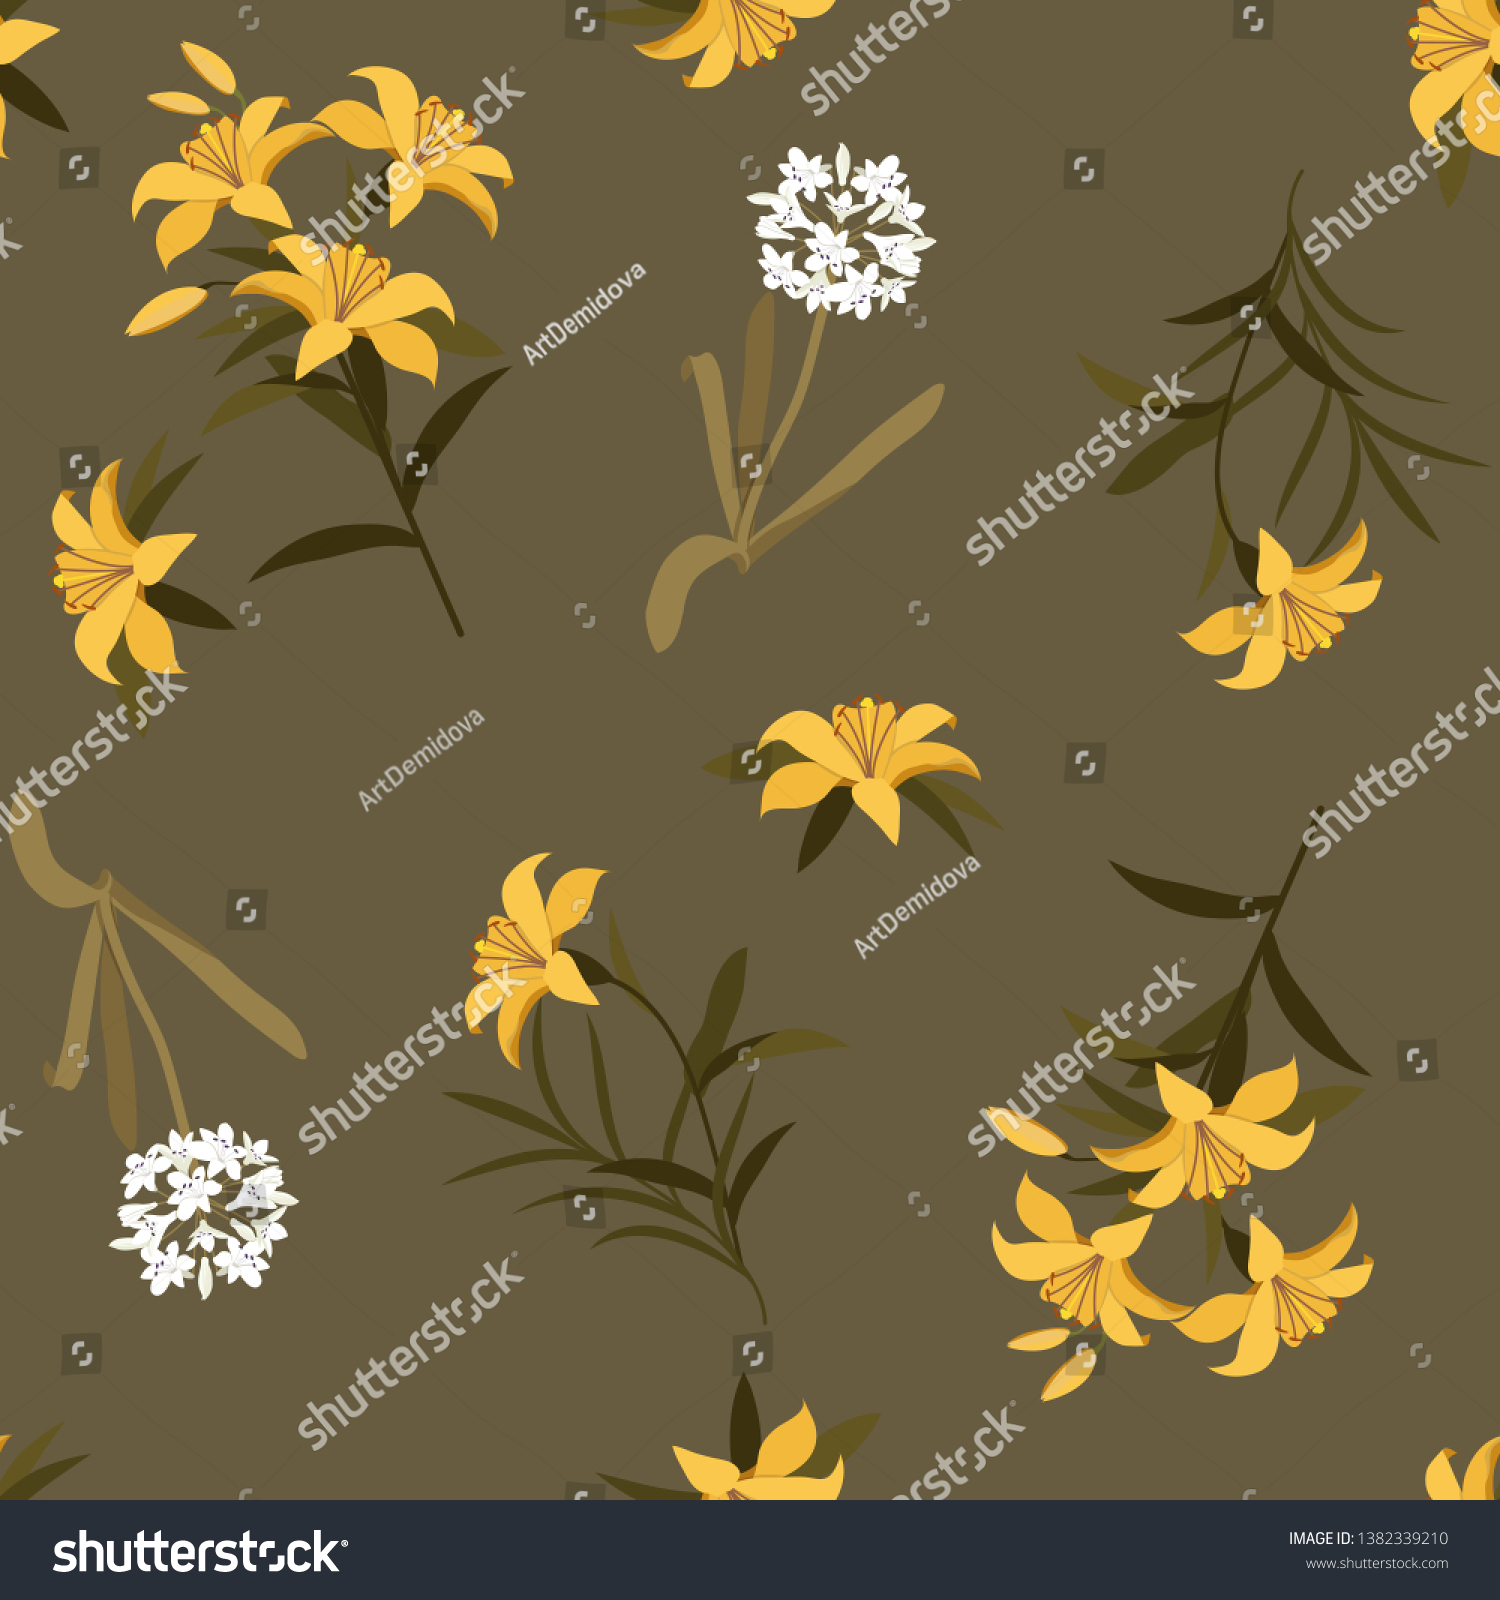 SVG of Seamless pattern. White agapanthus flower pattern and lily on a brown background. This pattern can be used for printing on textiles, wallpaper and other surfaces. svg